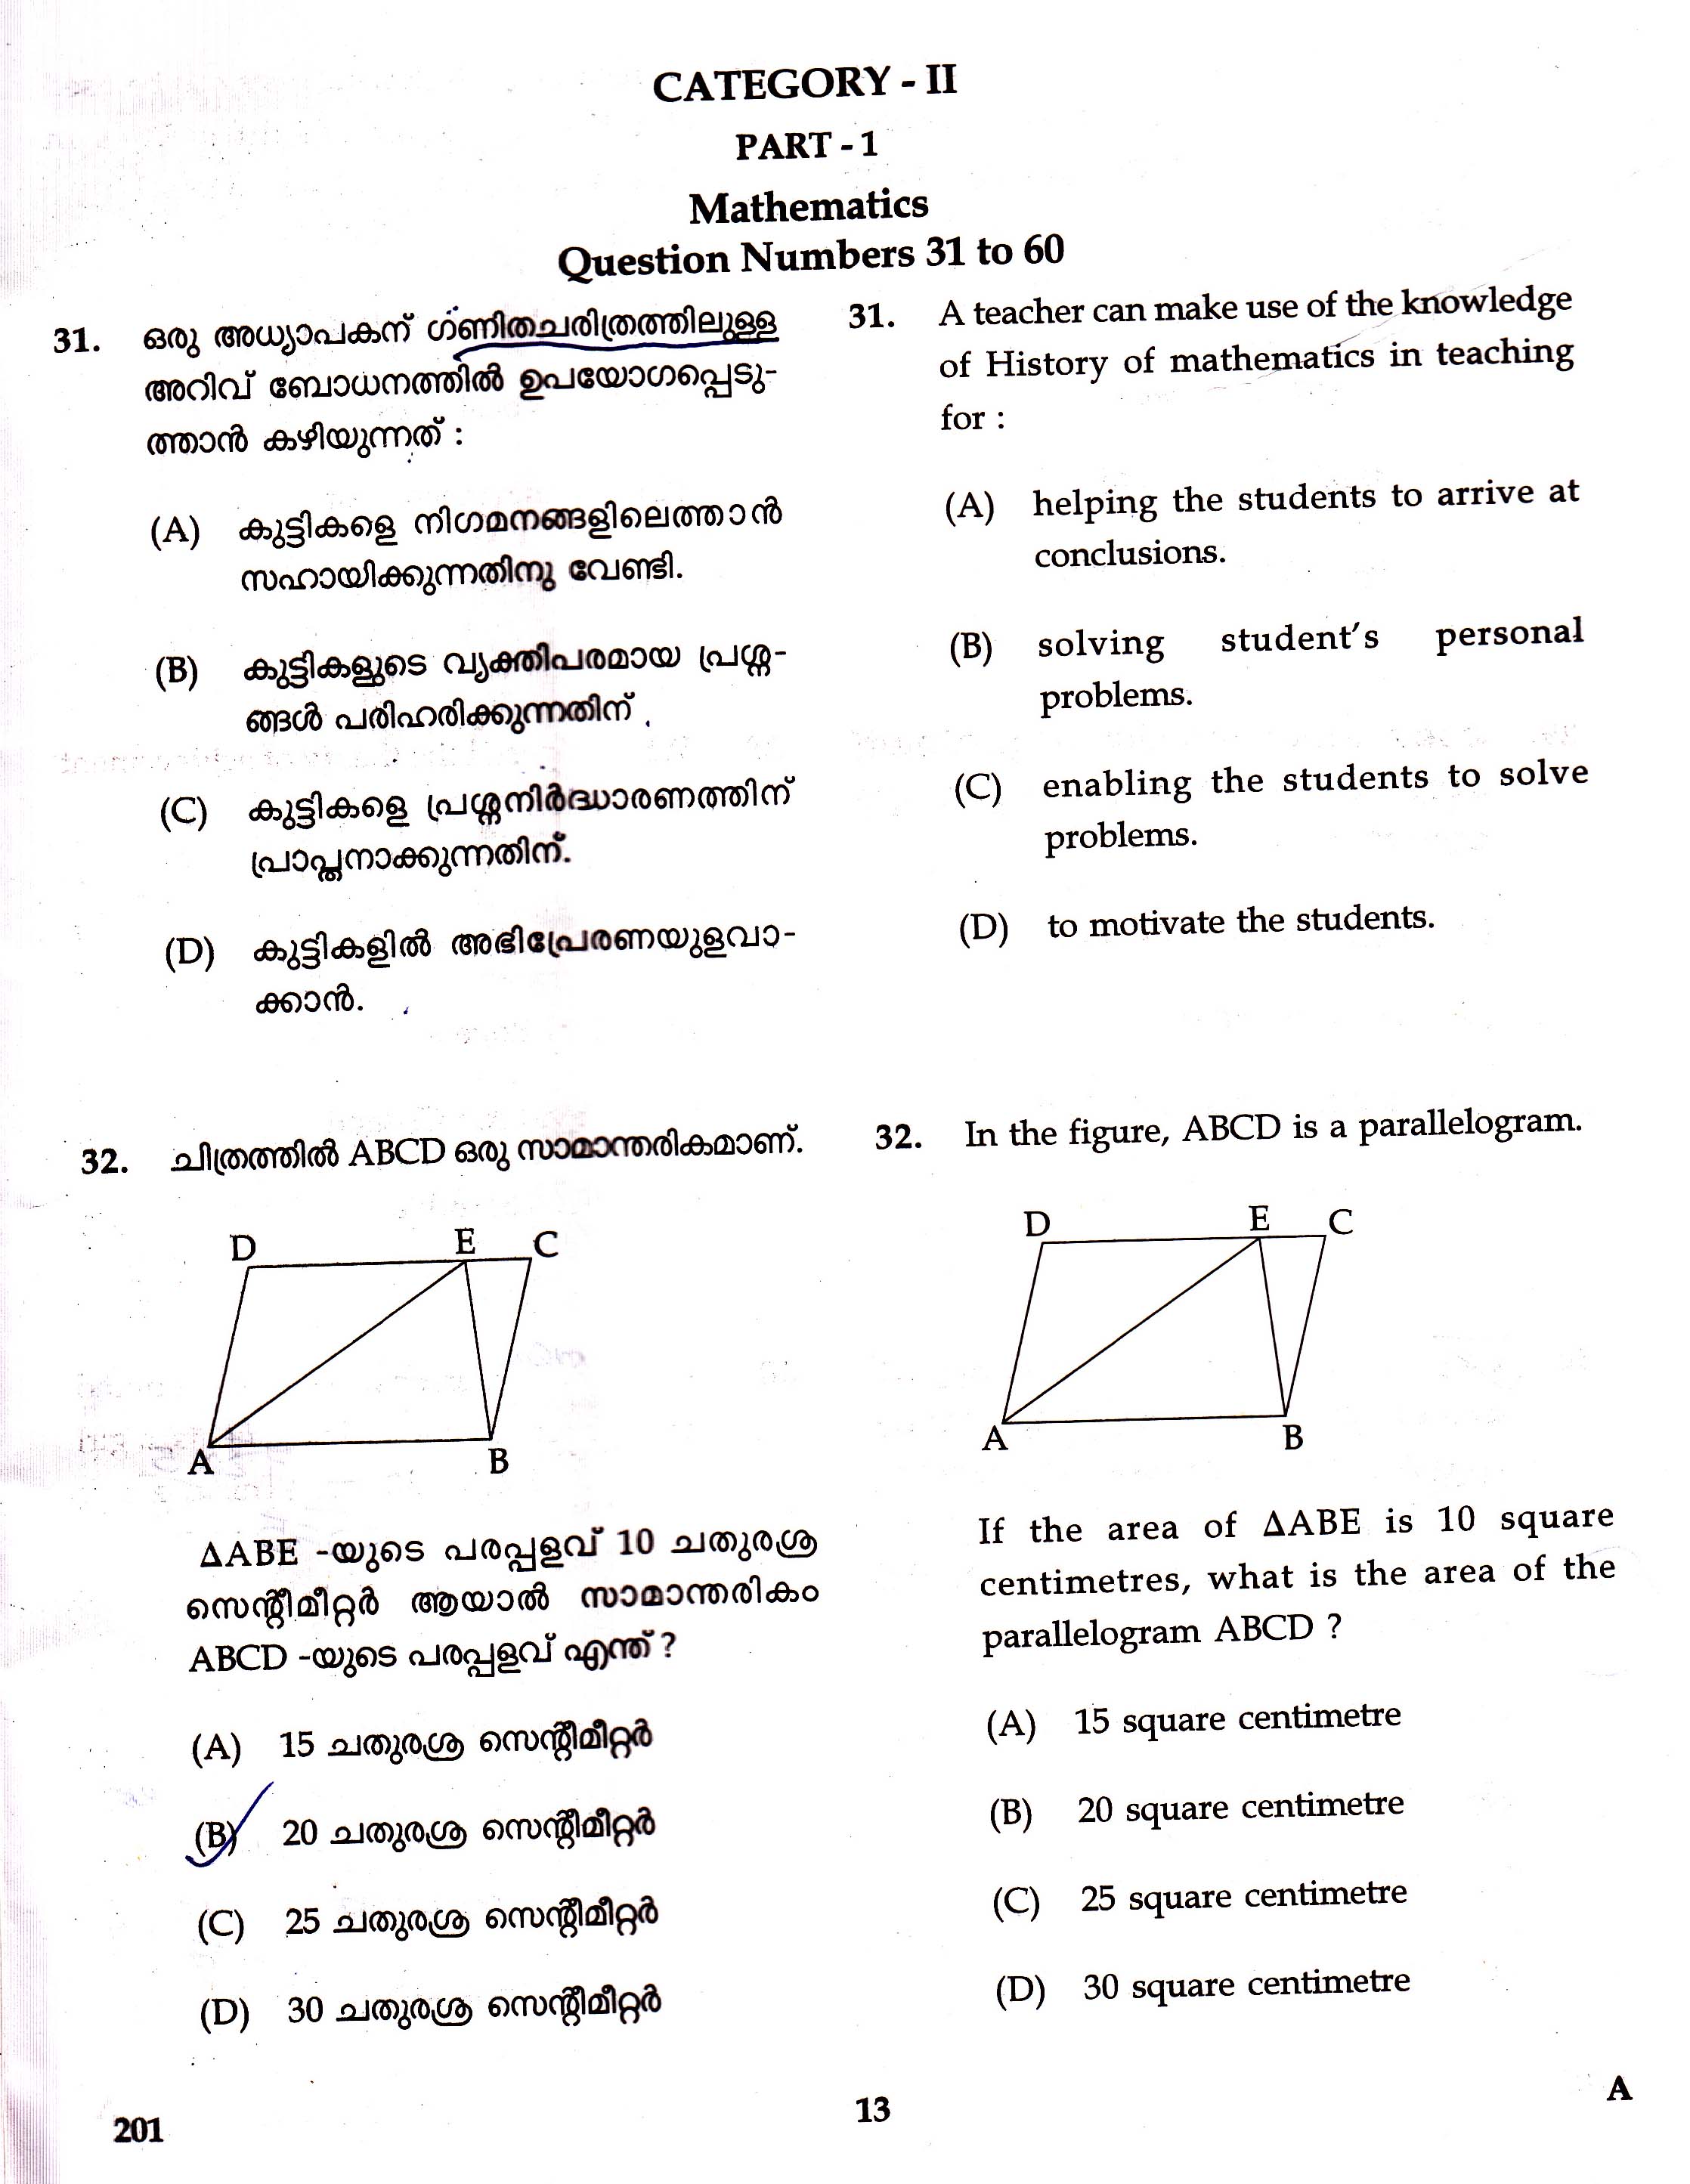 KTET Category II Part 1 Mathematics Question Paper with Answers August 2017 1